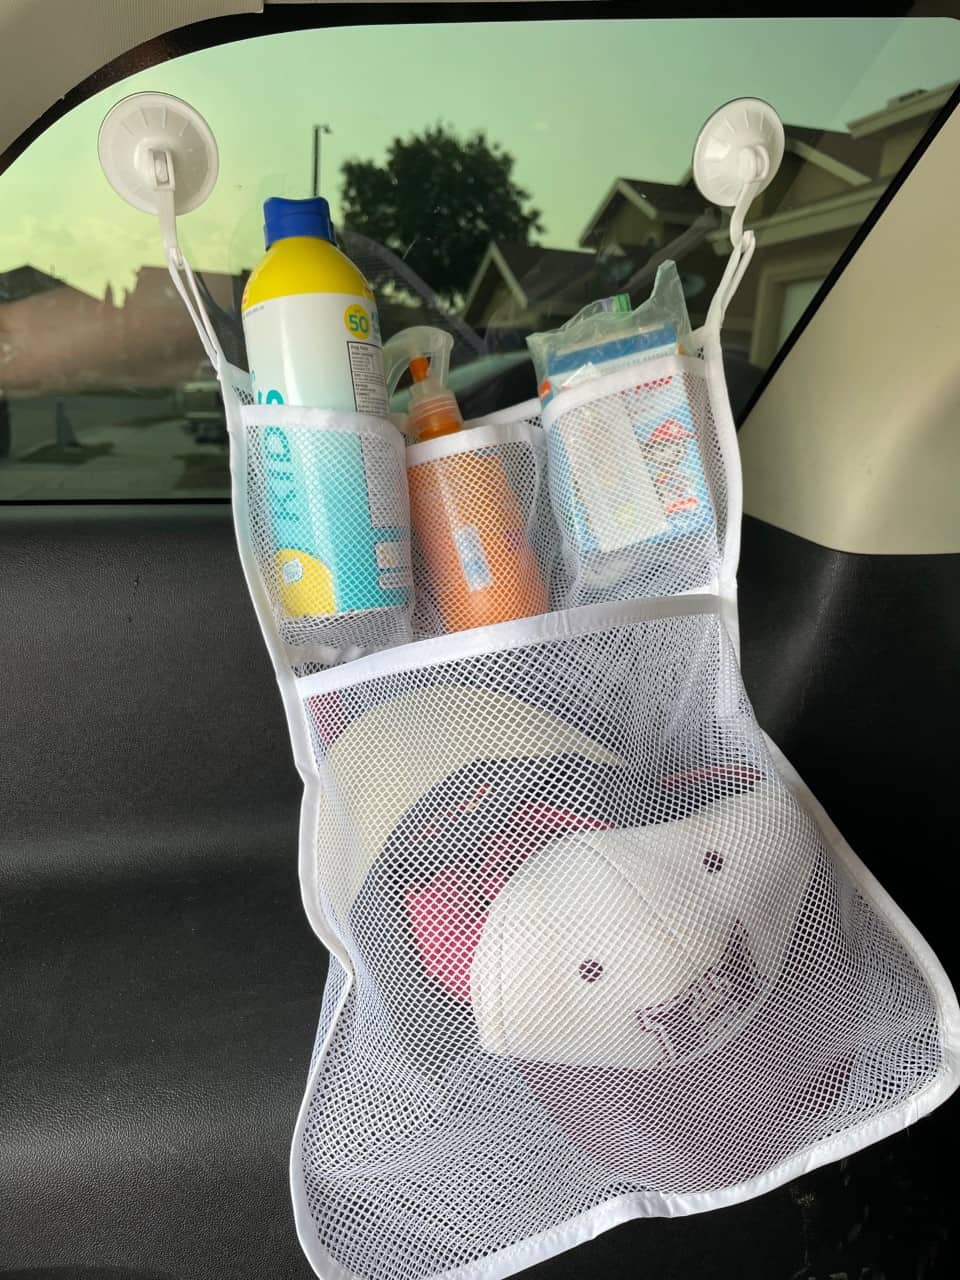 mesh bath toy organizer with sunscreen and hats in window in trunk of car